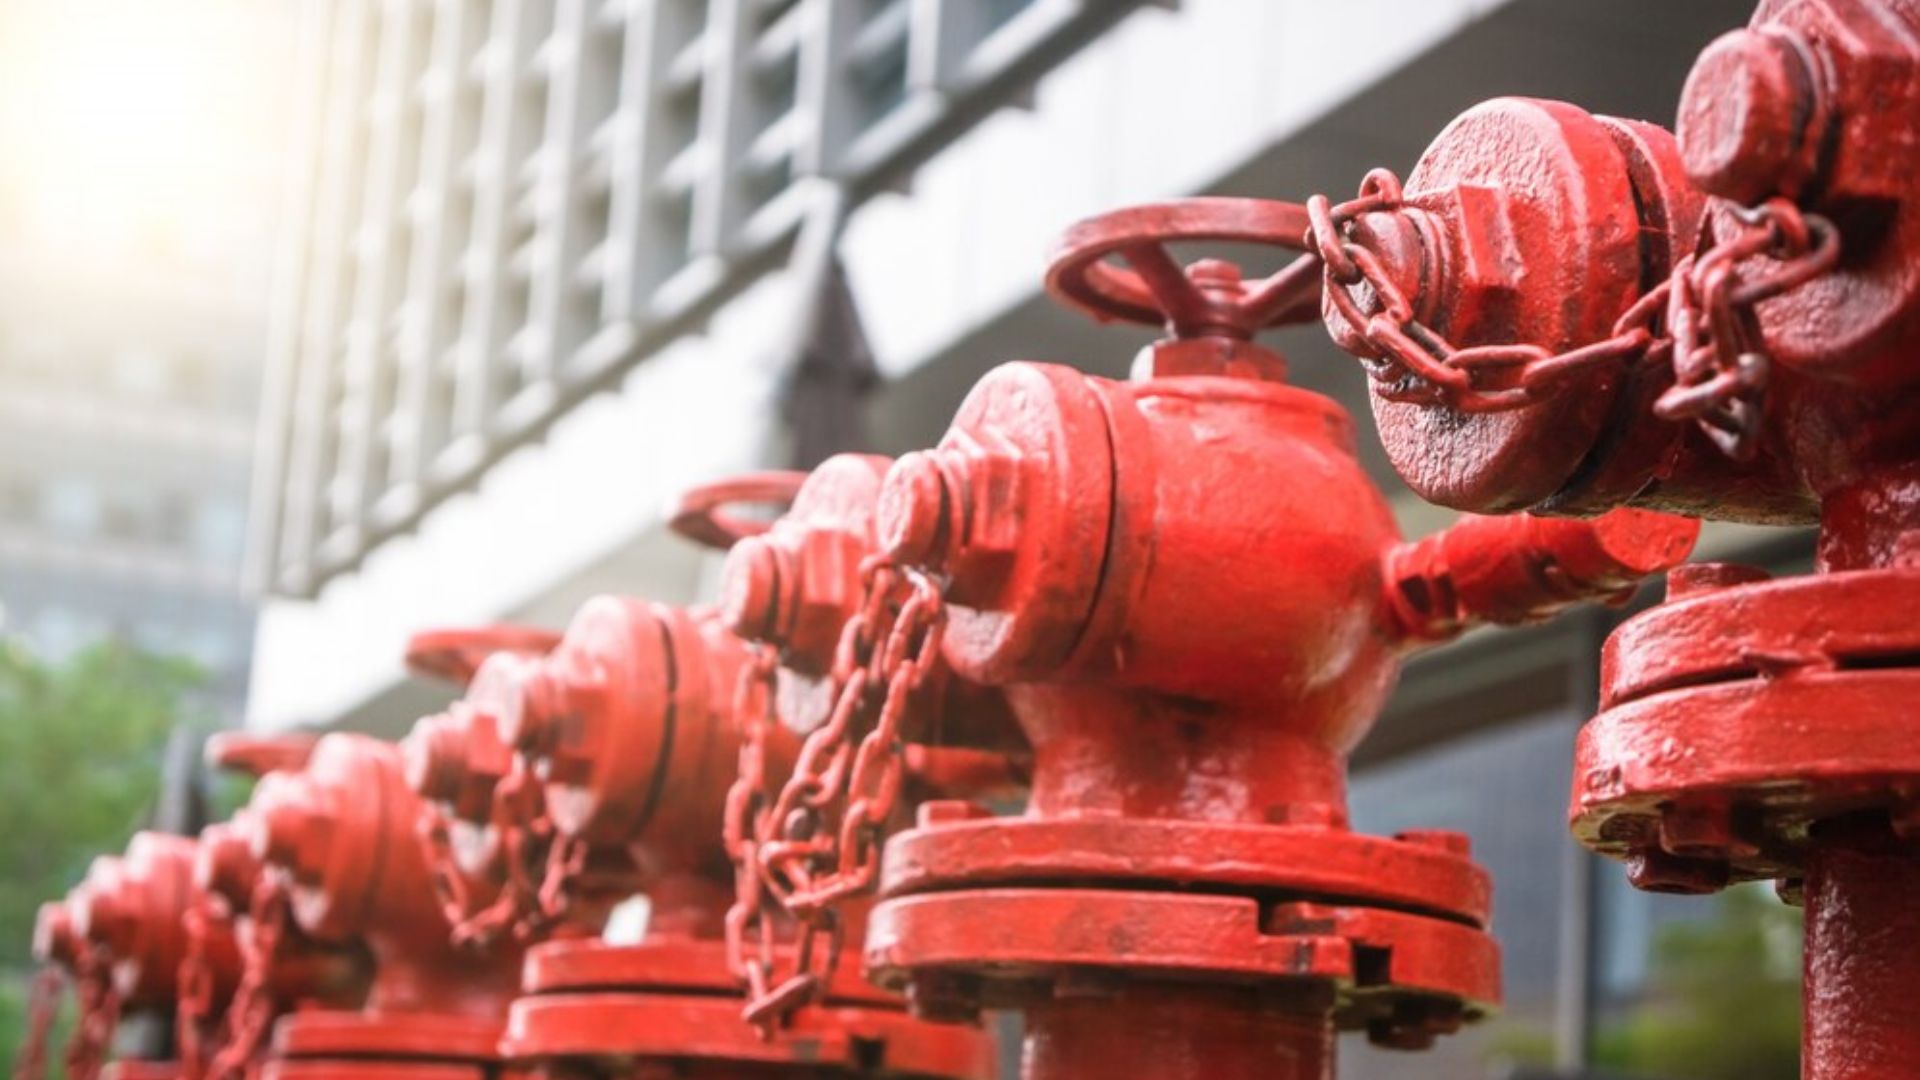 Find Reliable Firefighting Hydrant Suppliers